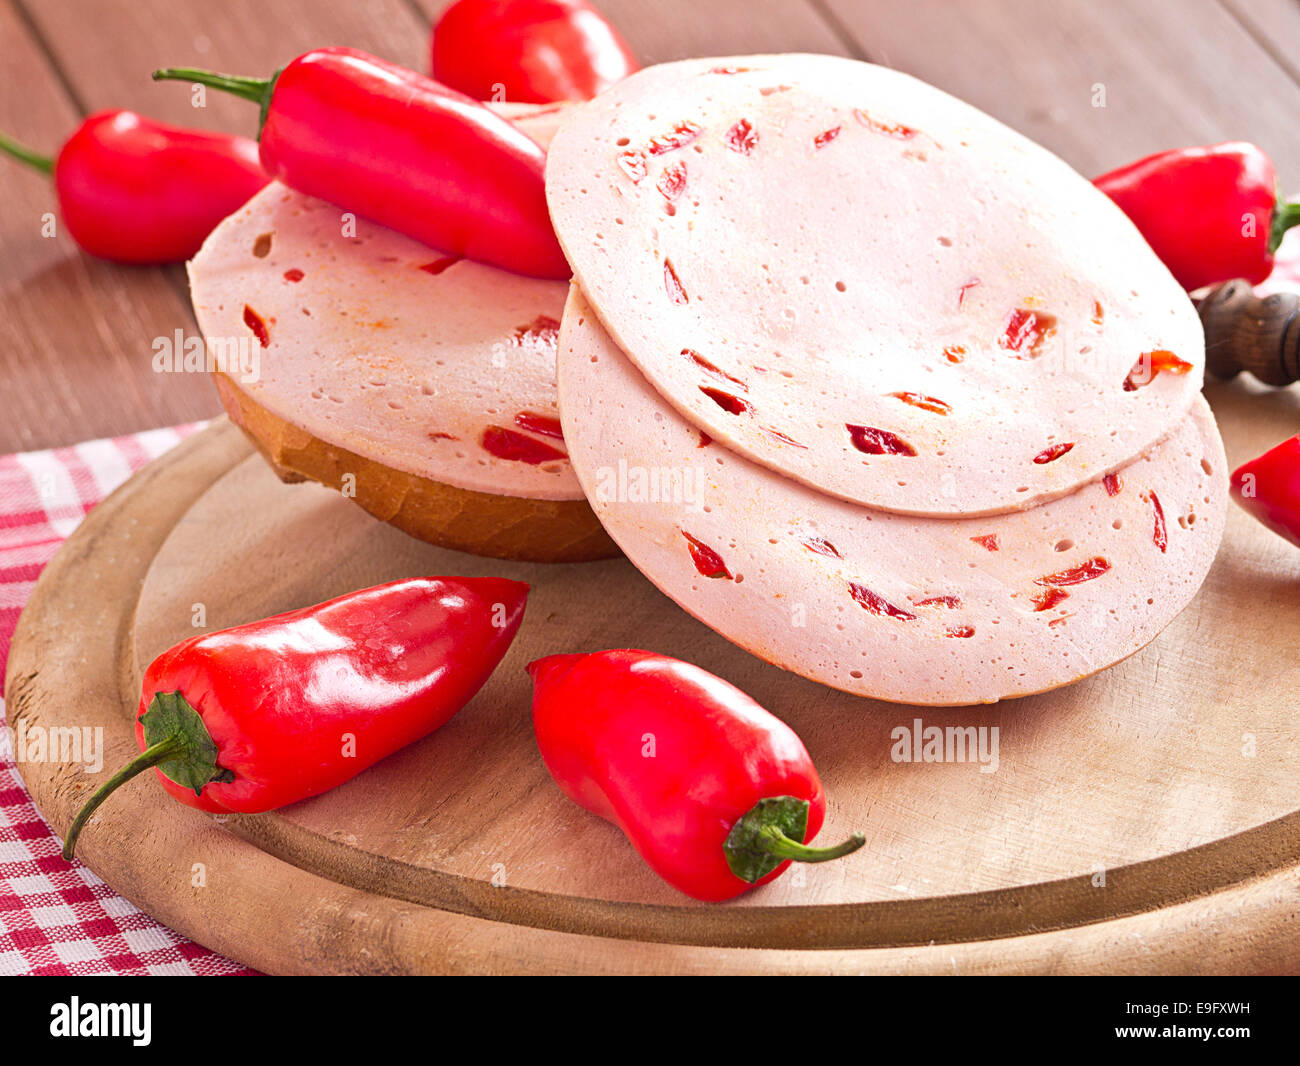 Sandwiches topped with sausage Stock Photo